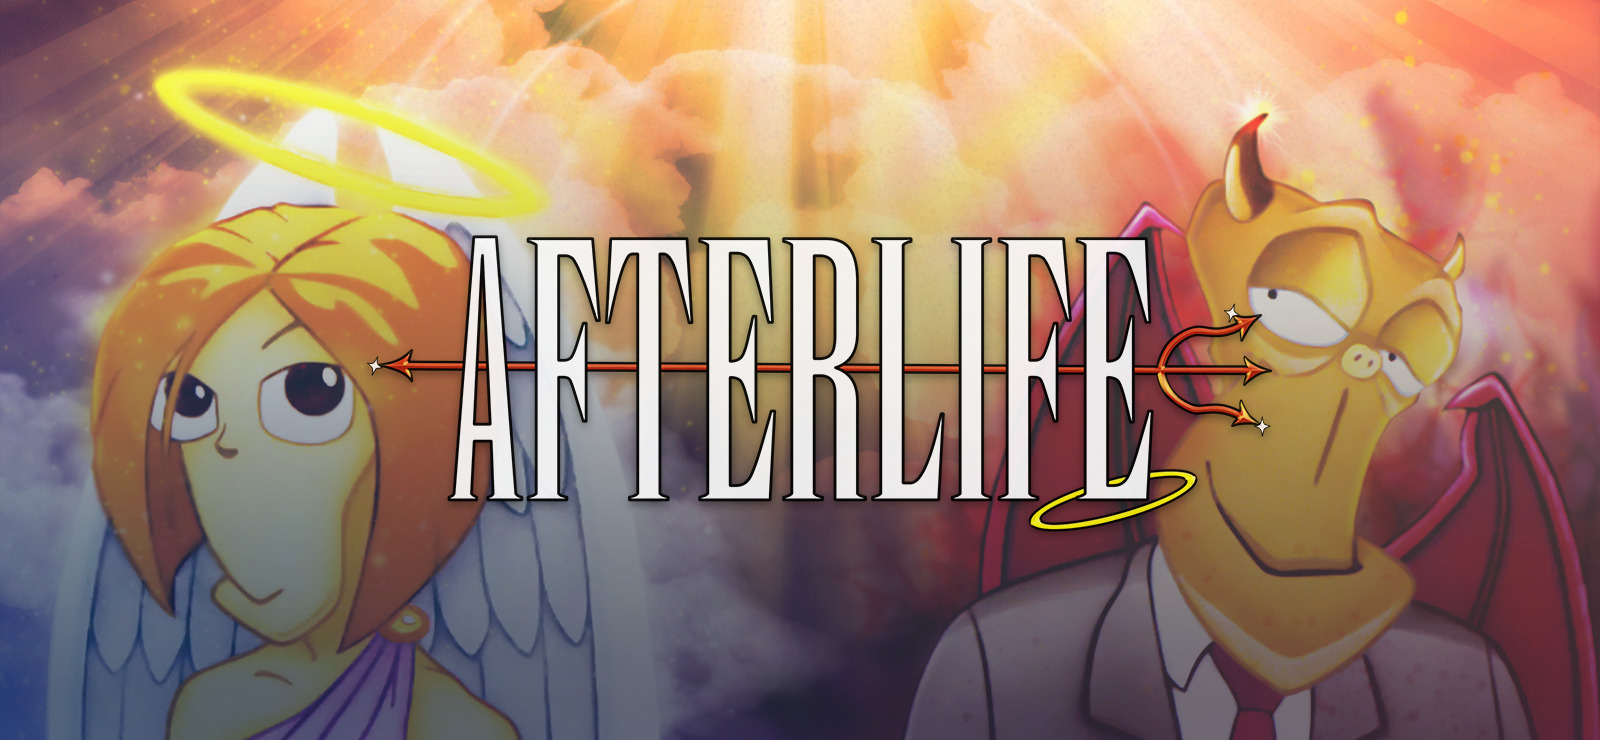 AFTERLIFE: THE GAME - Play Online for Free!